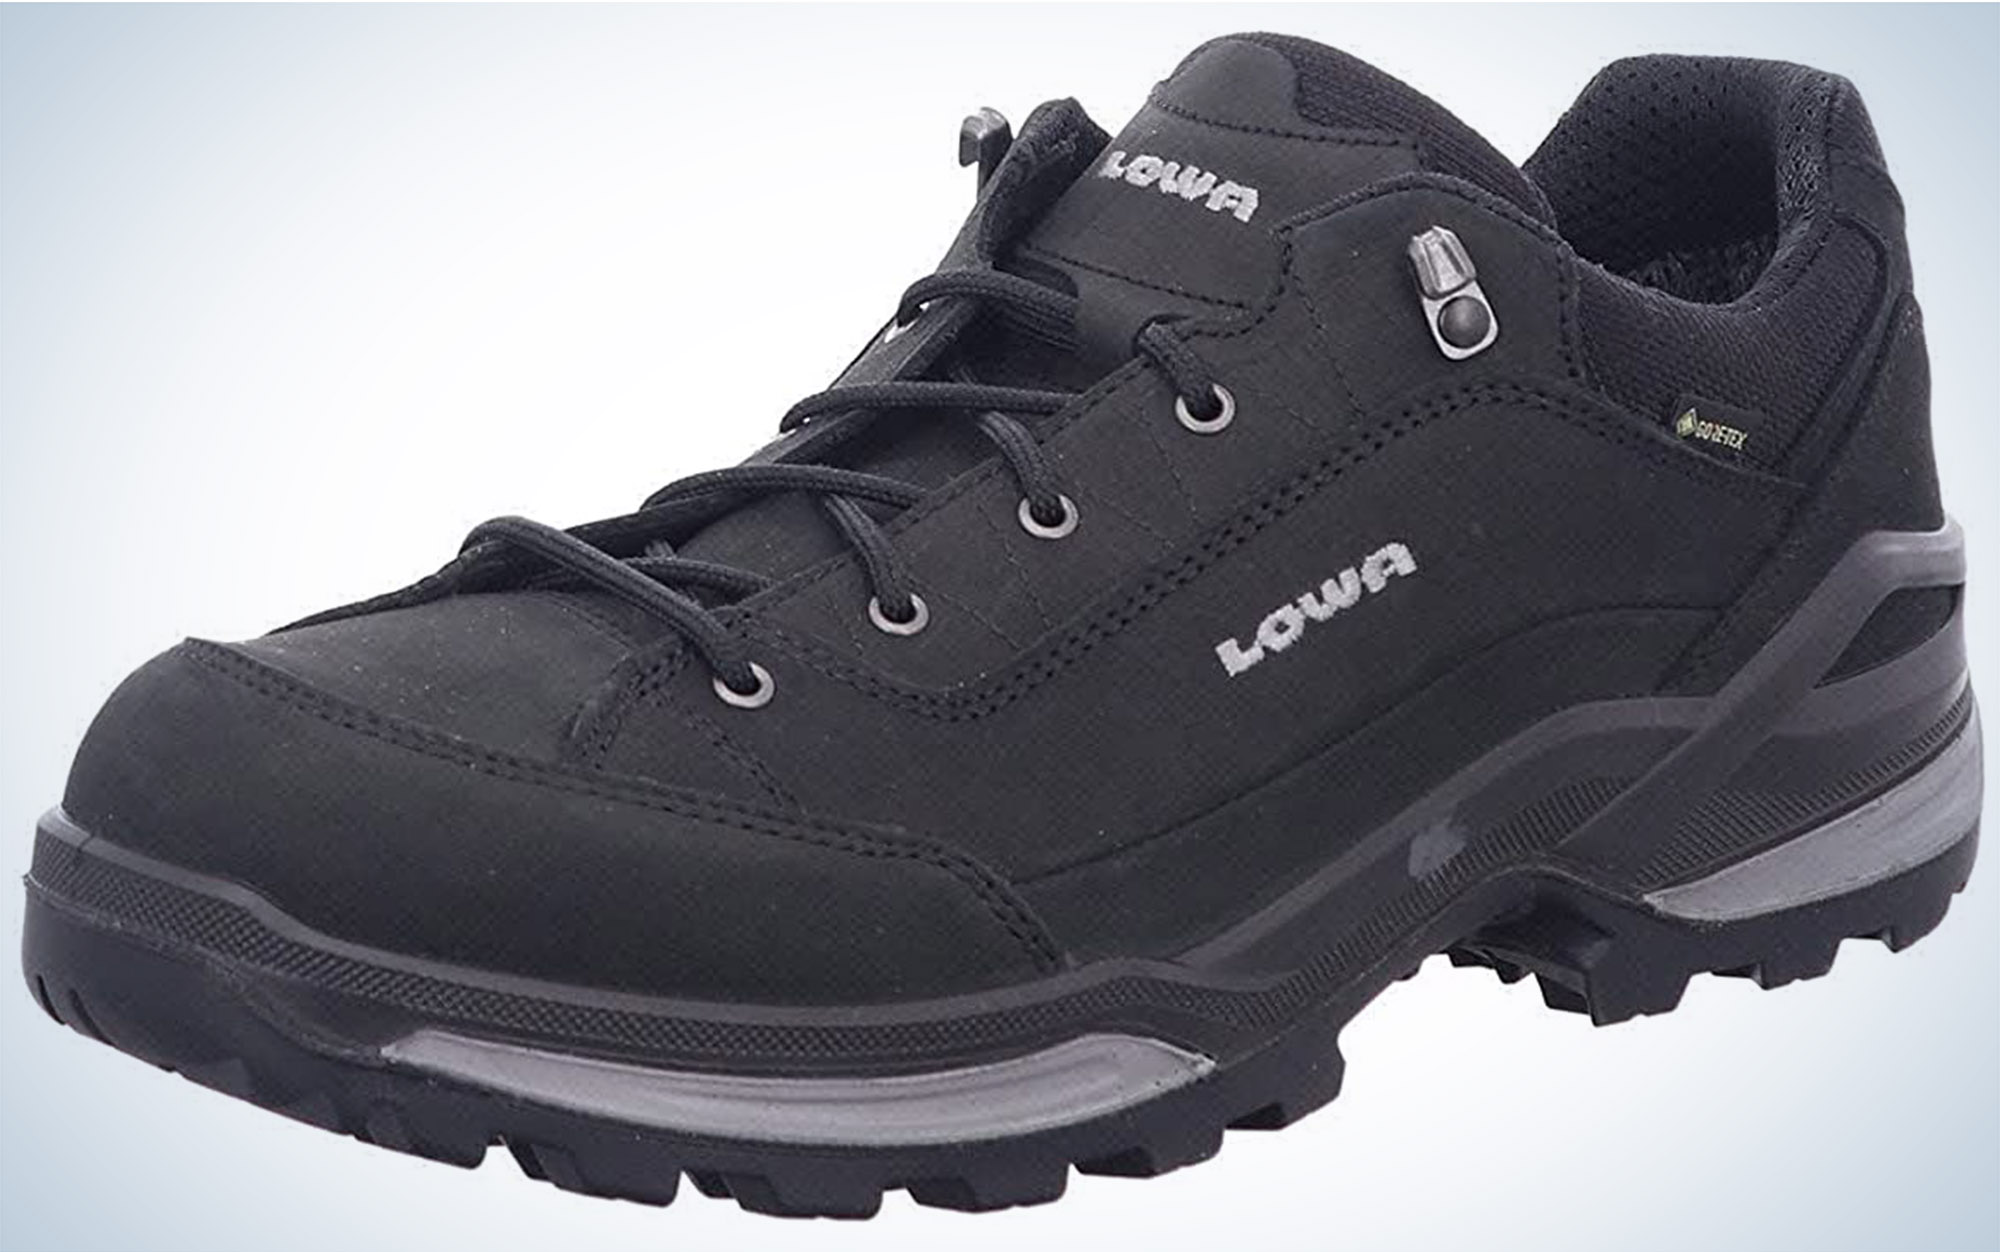 We tested the Lowa Renegade GTX Mid.